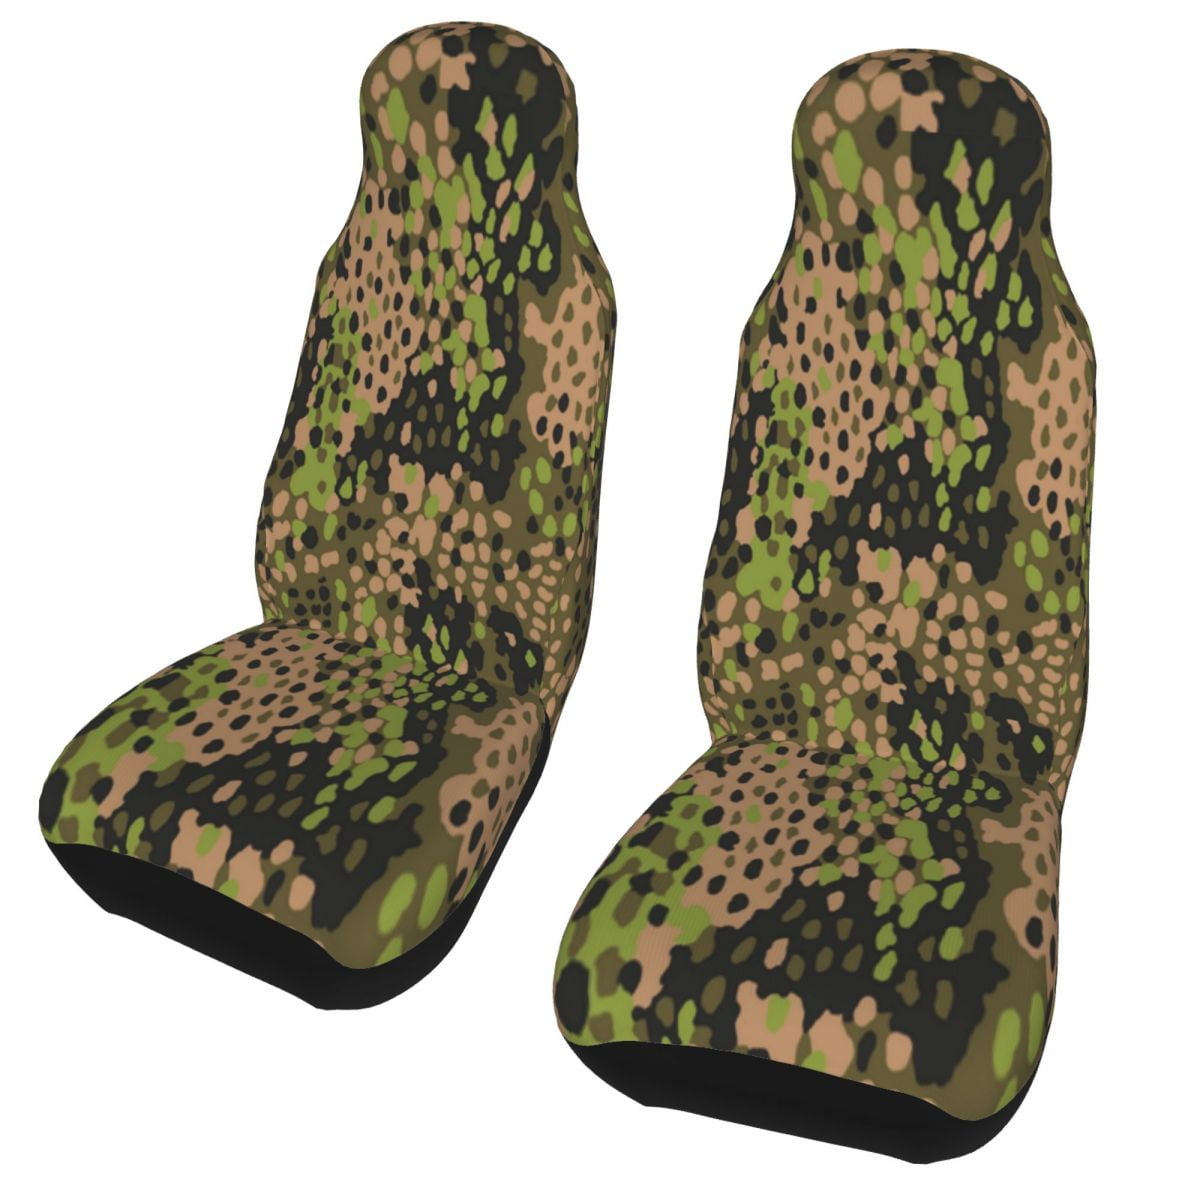 Navy Blue Military Camo Universal Car Seat Covers Fit for Car Trucks ...